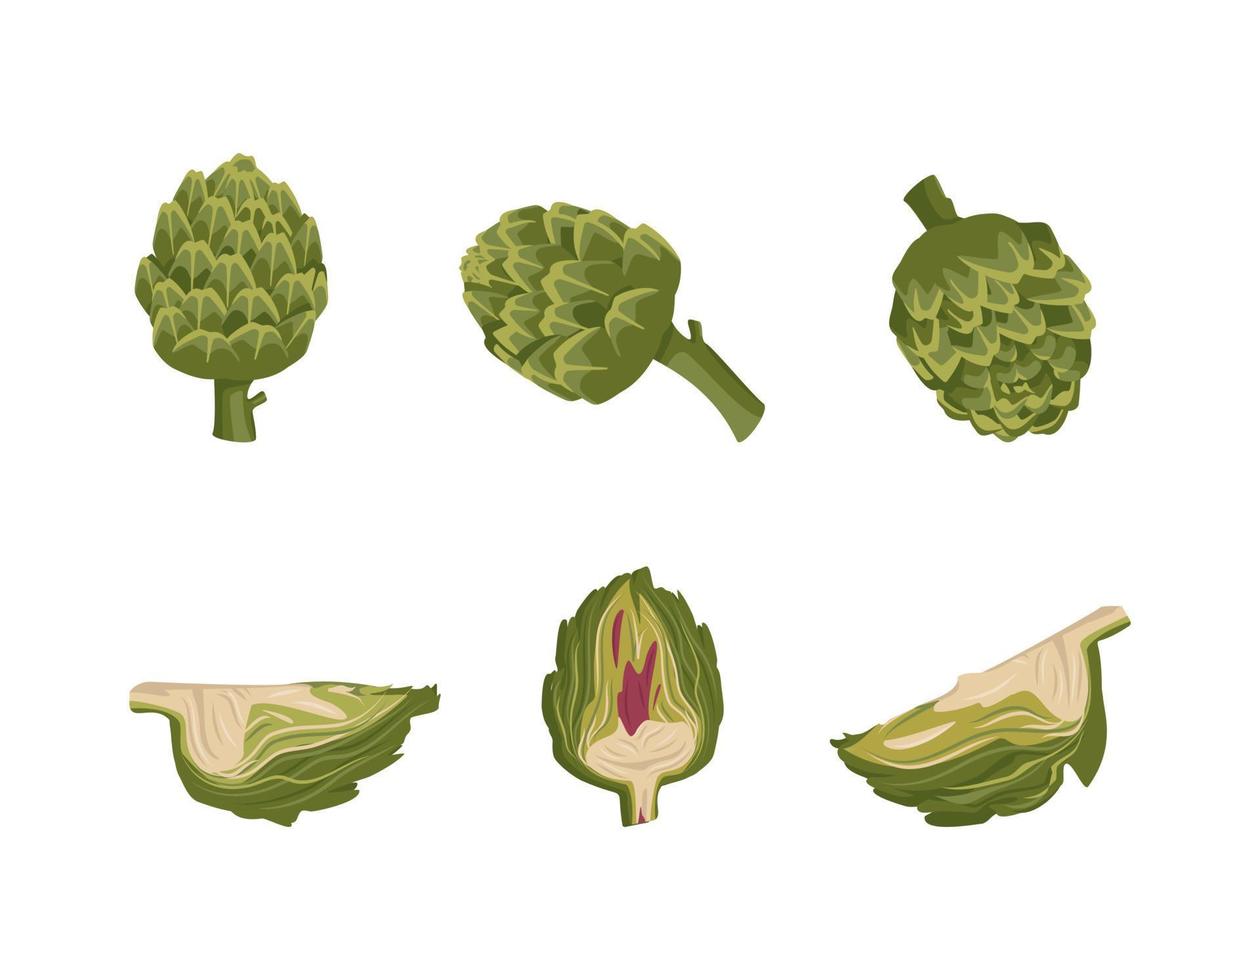 Set of green artichoke icons. Whole and part healthy vegetables and leaves, harvesting. Delicious food for salad and cooking. Vector flat illustration